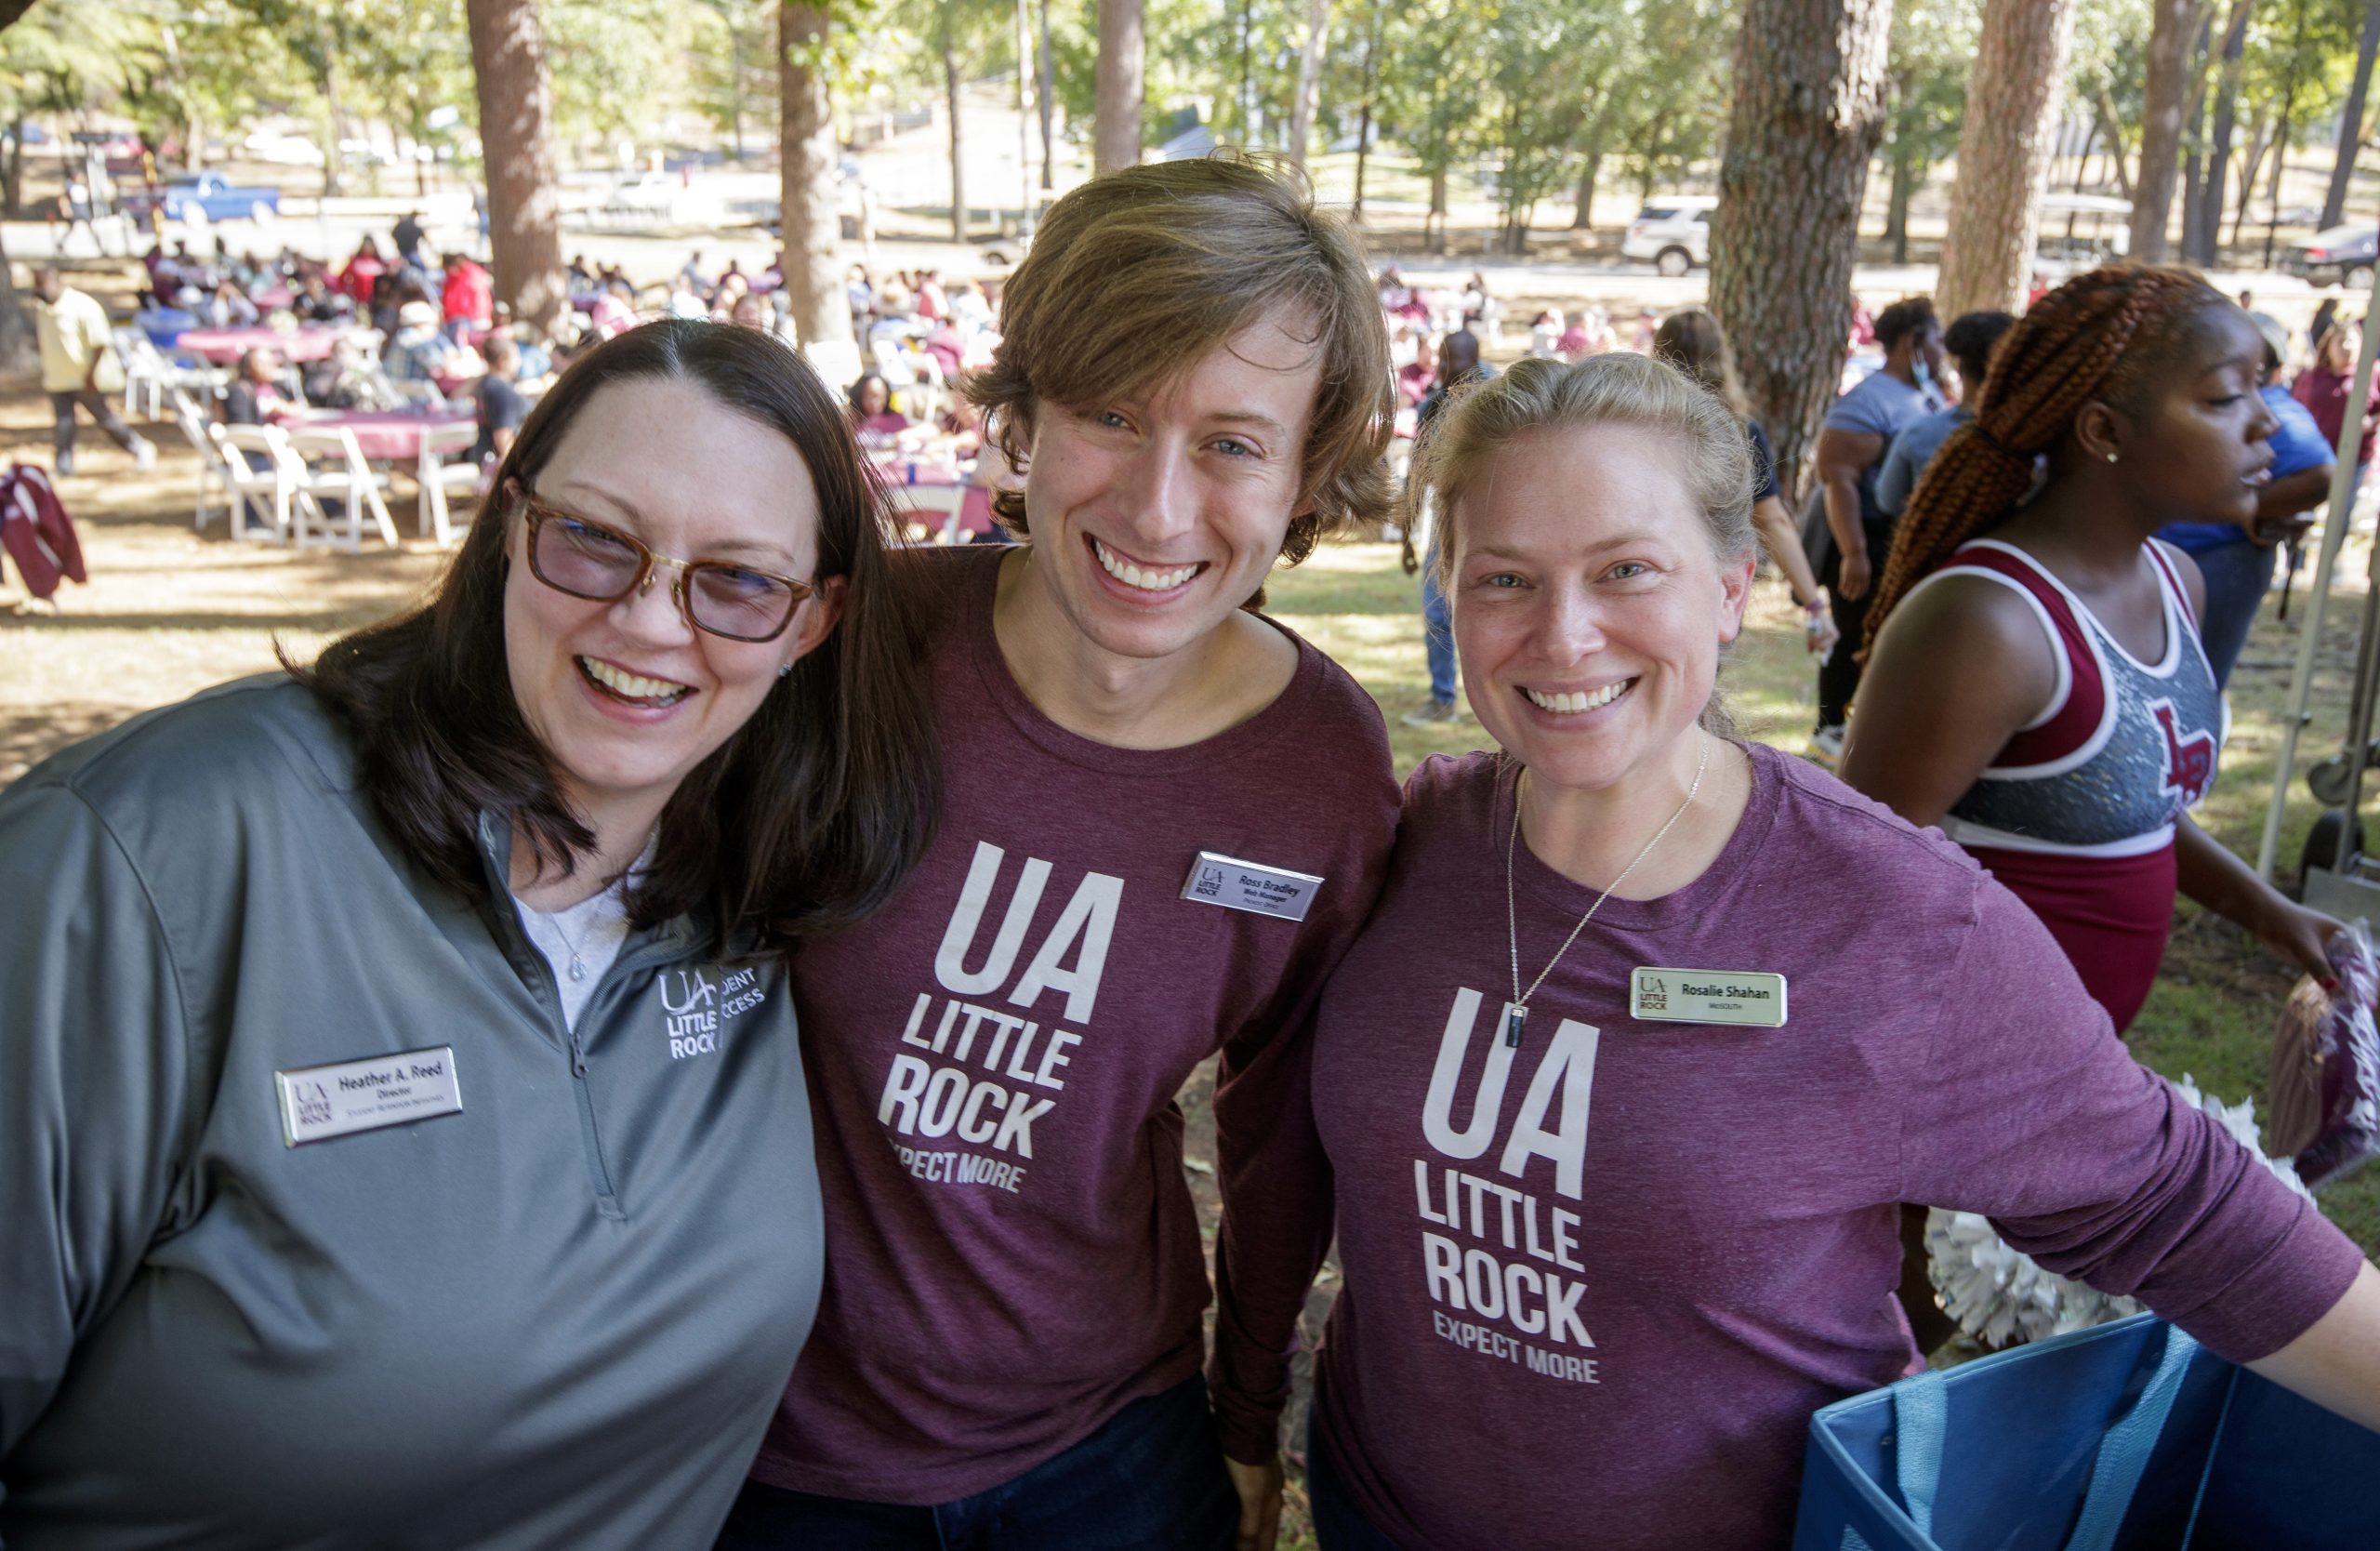 UA Little Rock staff members, from left, Heather Reed, Ross Bradley, and Rosale Shahan participate in the Alumni Association's annual BBQ at Bailey’s event. The university tradition celebrates the return of students to campus with free food and fun at the Bailey Alumni & Friends Center. This year also launched the university’s Centennial Campaign.